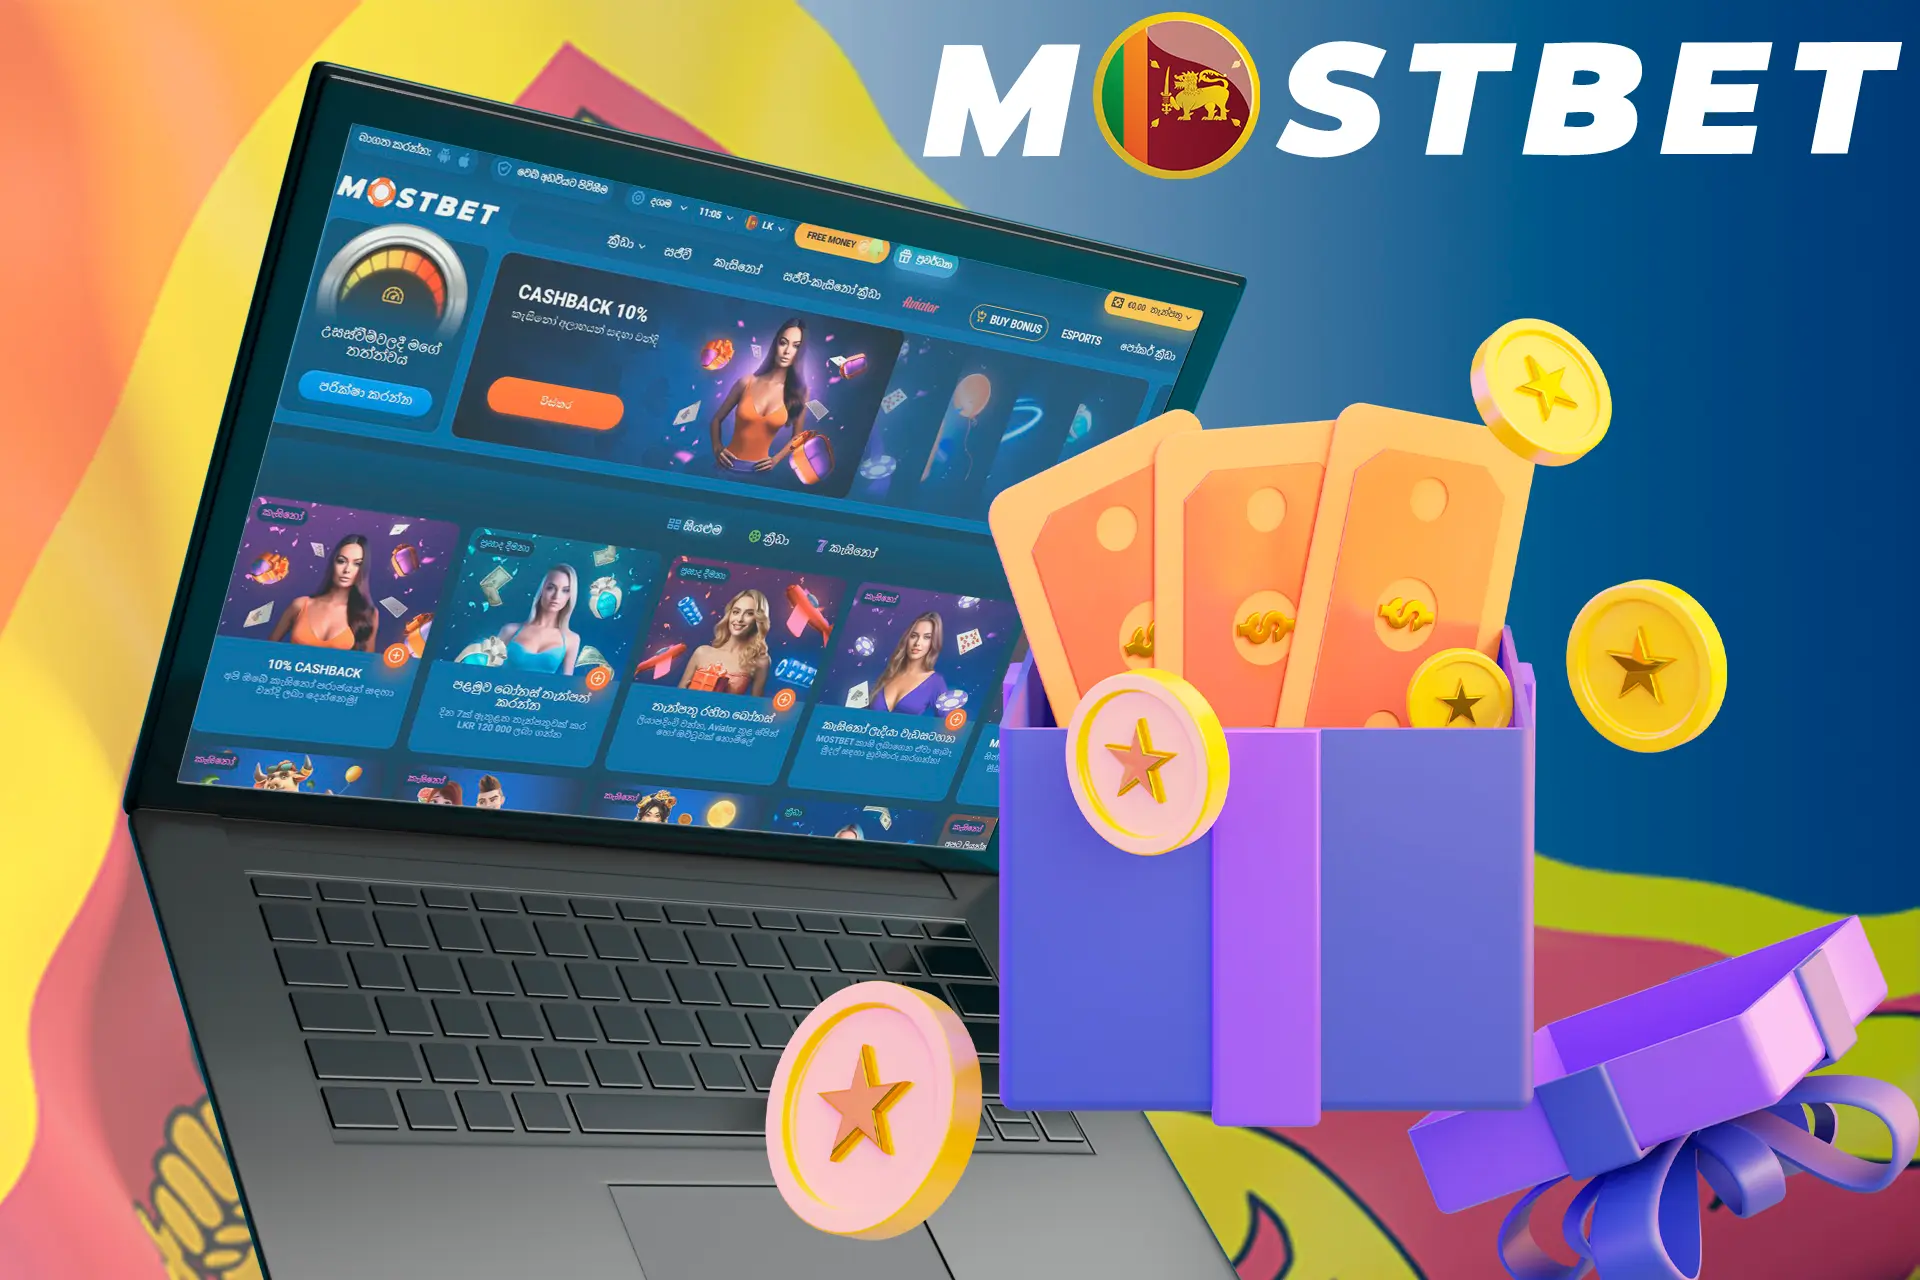 Check out the bonuses and promotions at Mostbet Sri Lanka